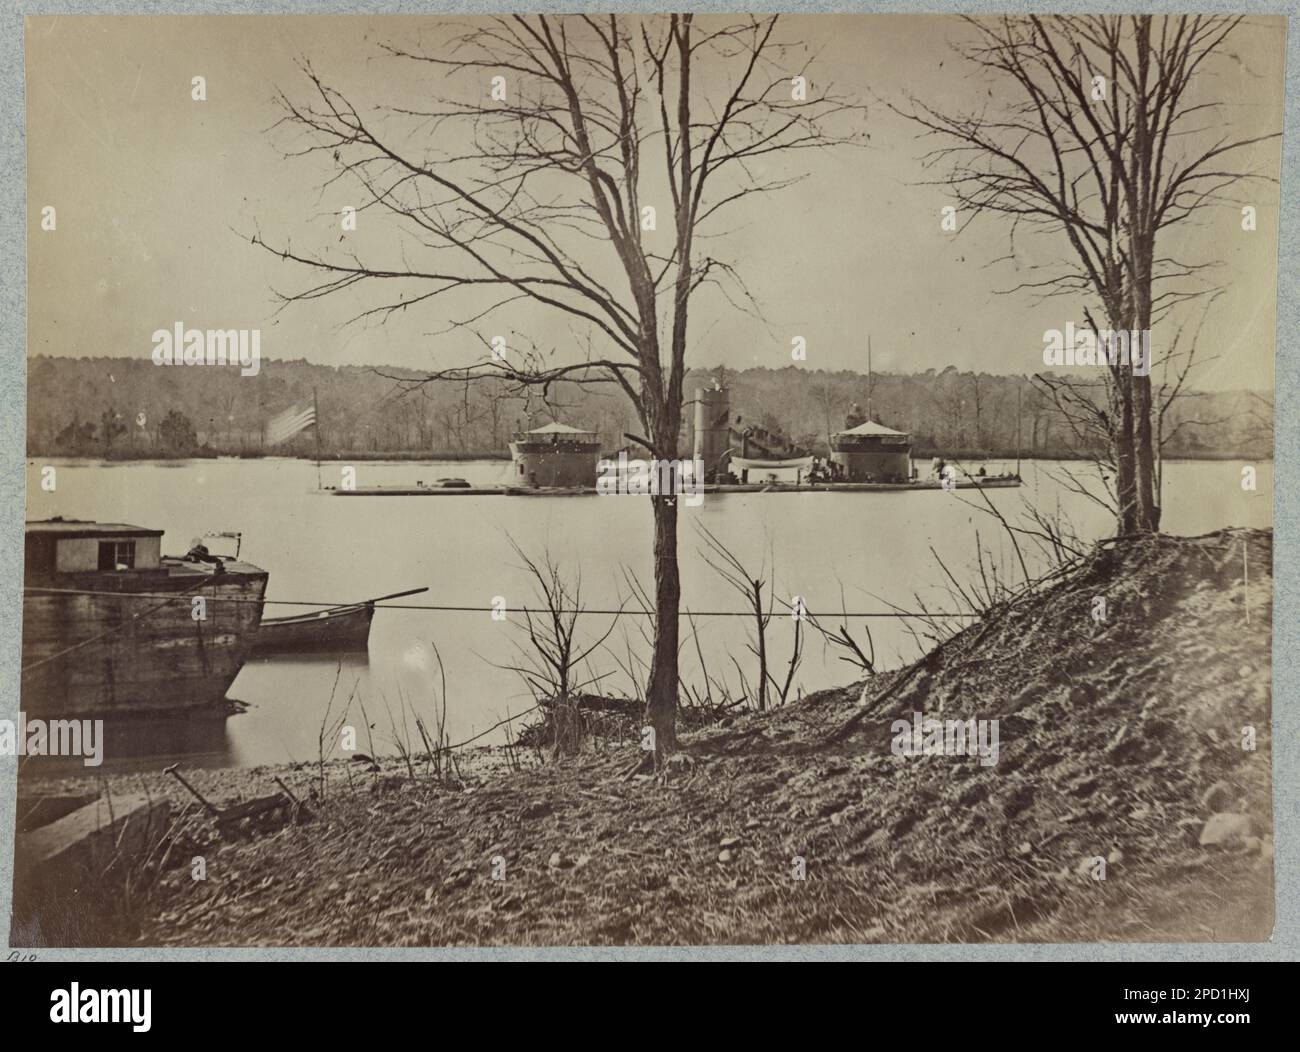 Double turreted monitor, Onondaga, James River, Virginia. No. B10, Title from item, Hand written on verso: 'Miller, vol. 6, p. 175', Gift; Col. Godwin Ordway; 1948. United States, History, Civil War, 1861-1865, United States, Virginia, James River. Stock Photo